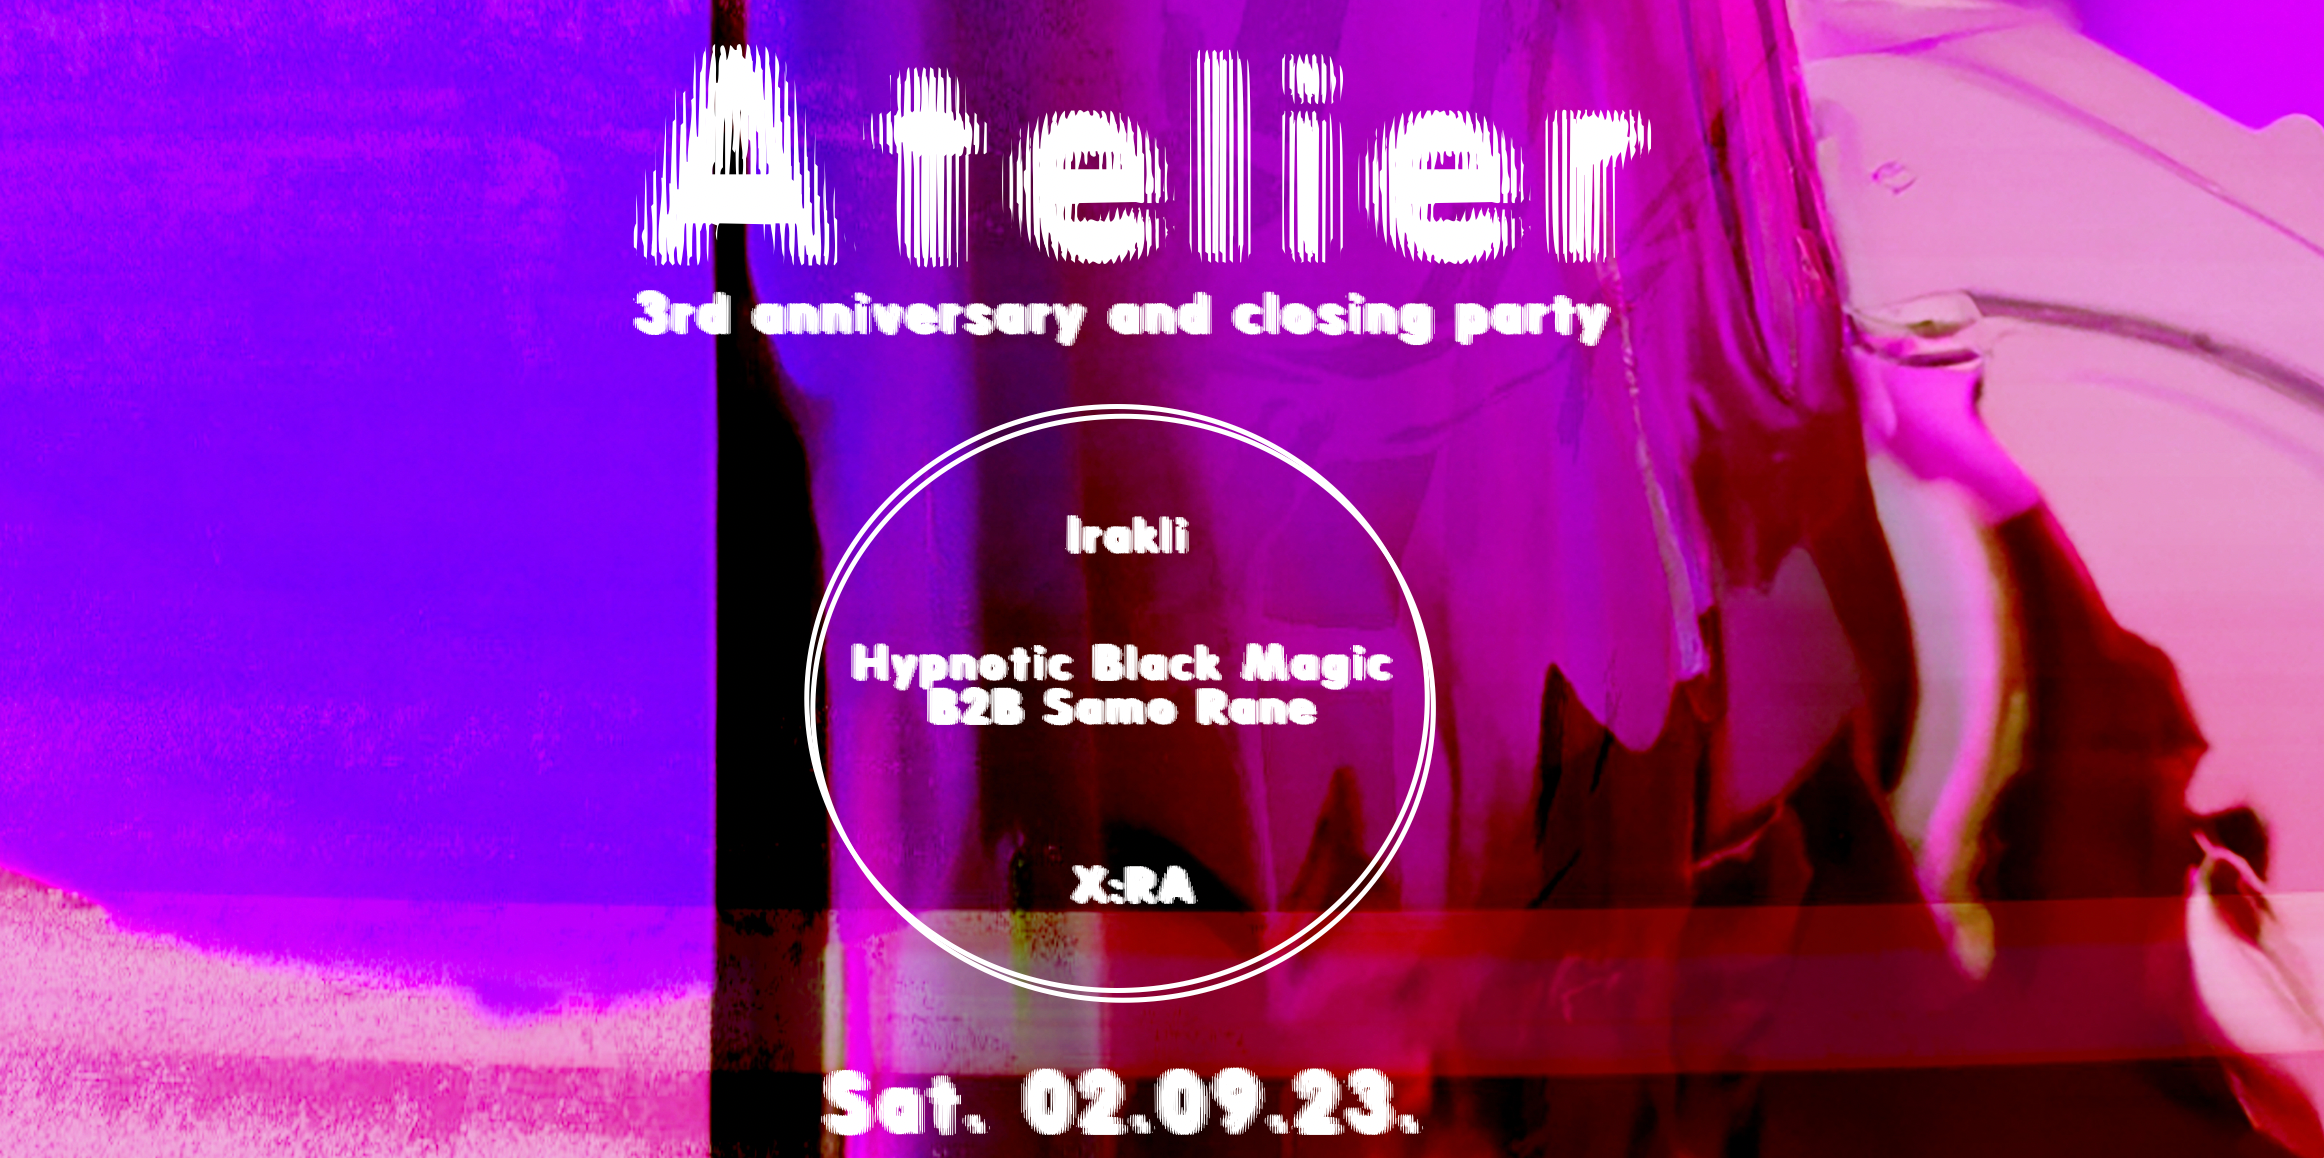 Atelier: 3rd Anniversary and Closing party - フライヤー表